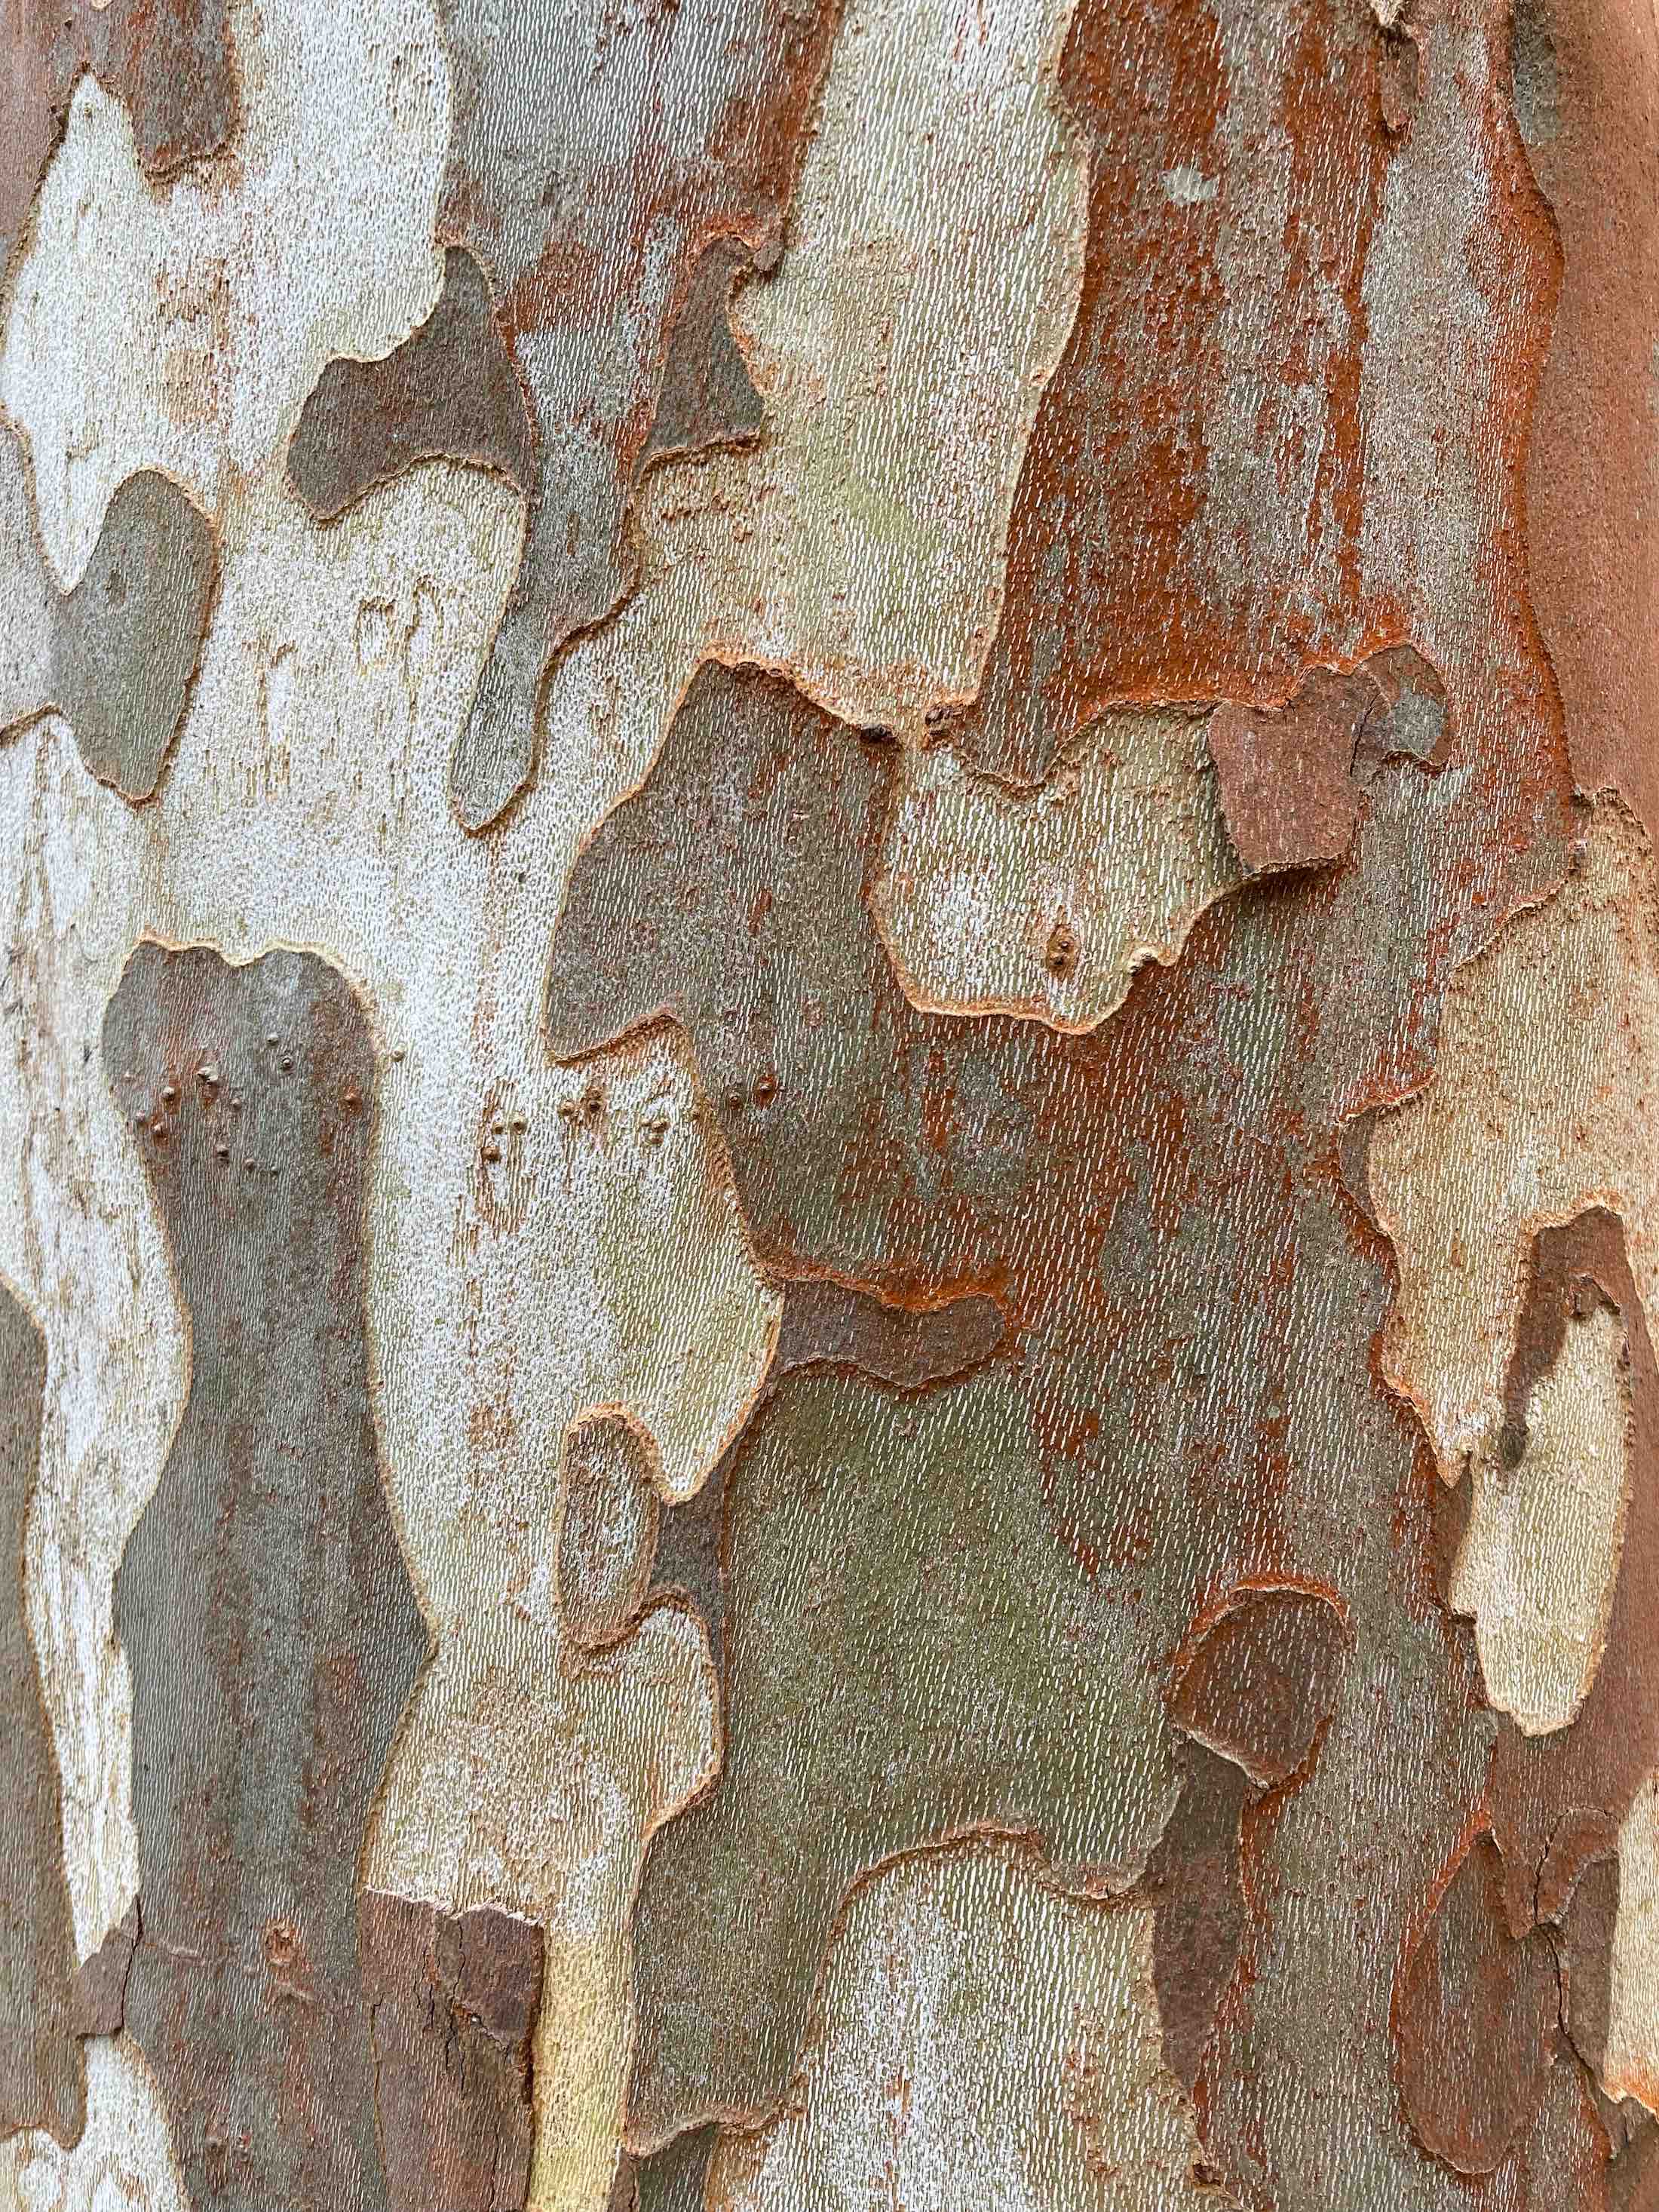 The Scientific Name is Platanus occidentalis. You will likely hear them called American Sycamore. This picture shows the Interesting and beautiful bark of Platanus occidentalis